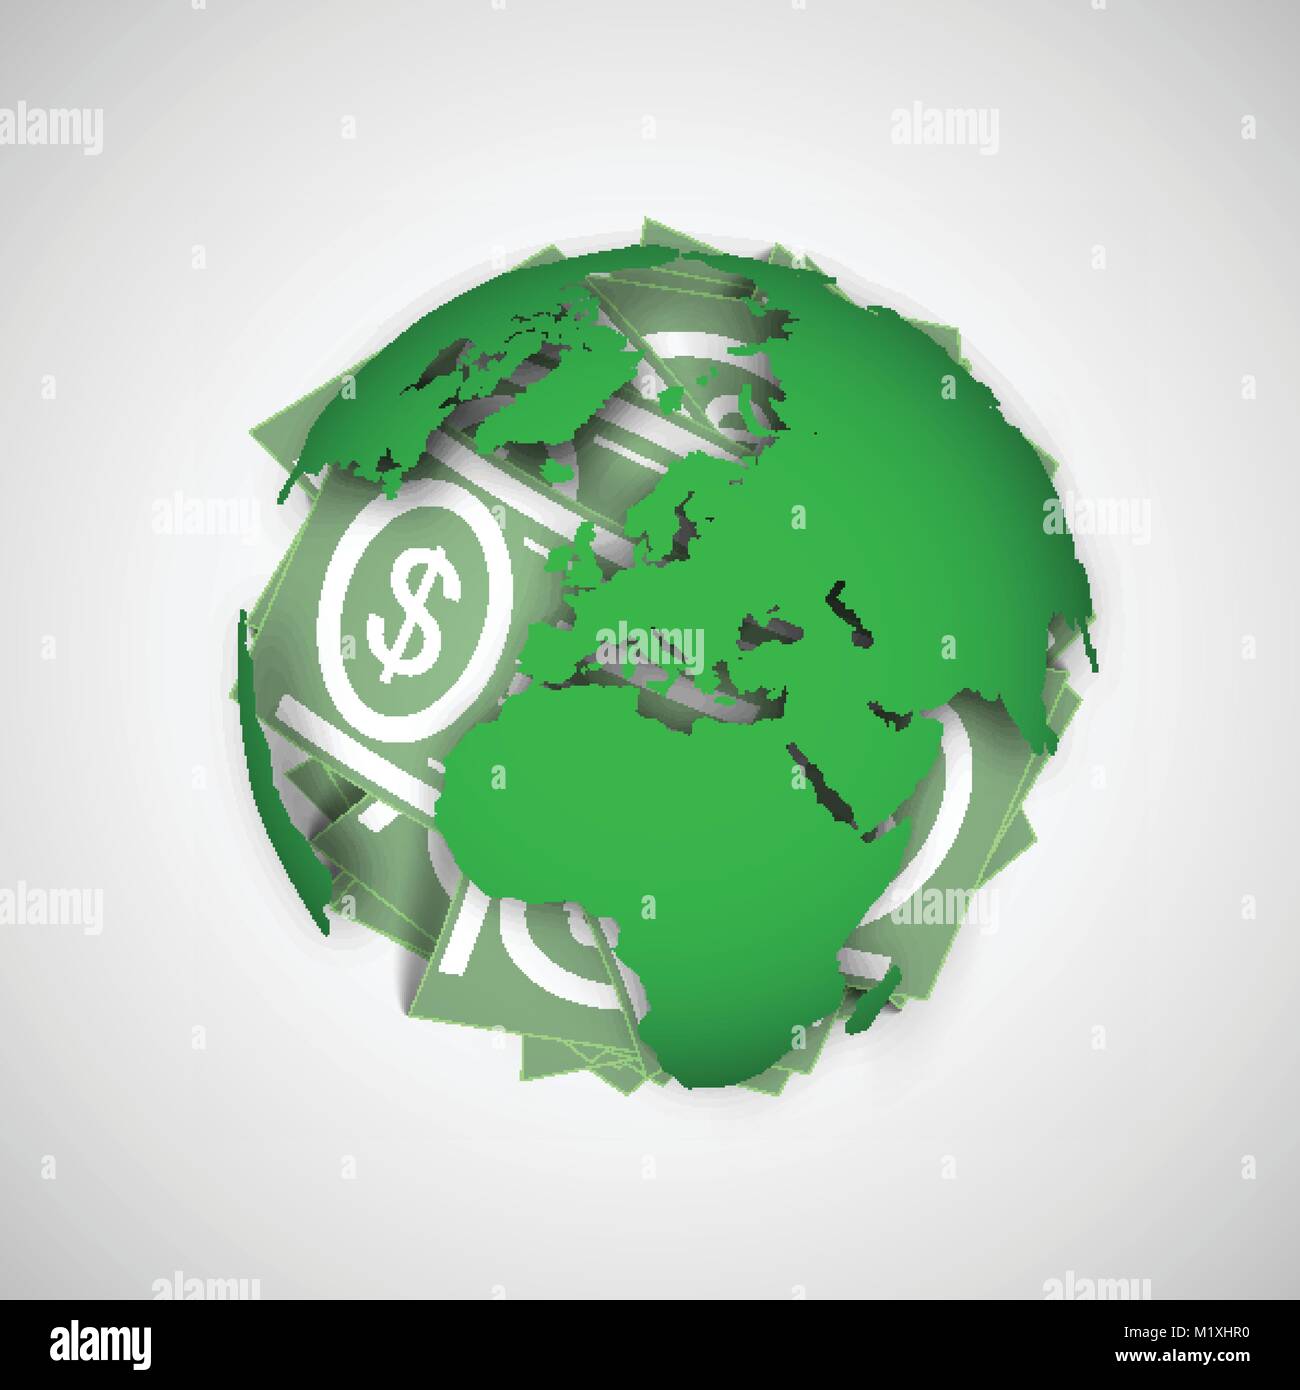 Earth and money vector illustration Stock Vector